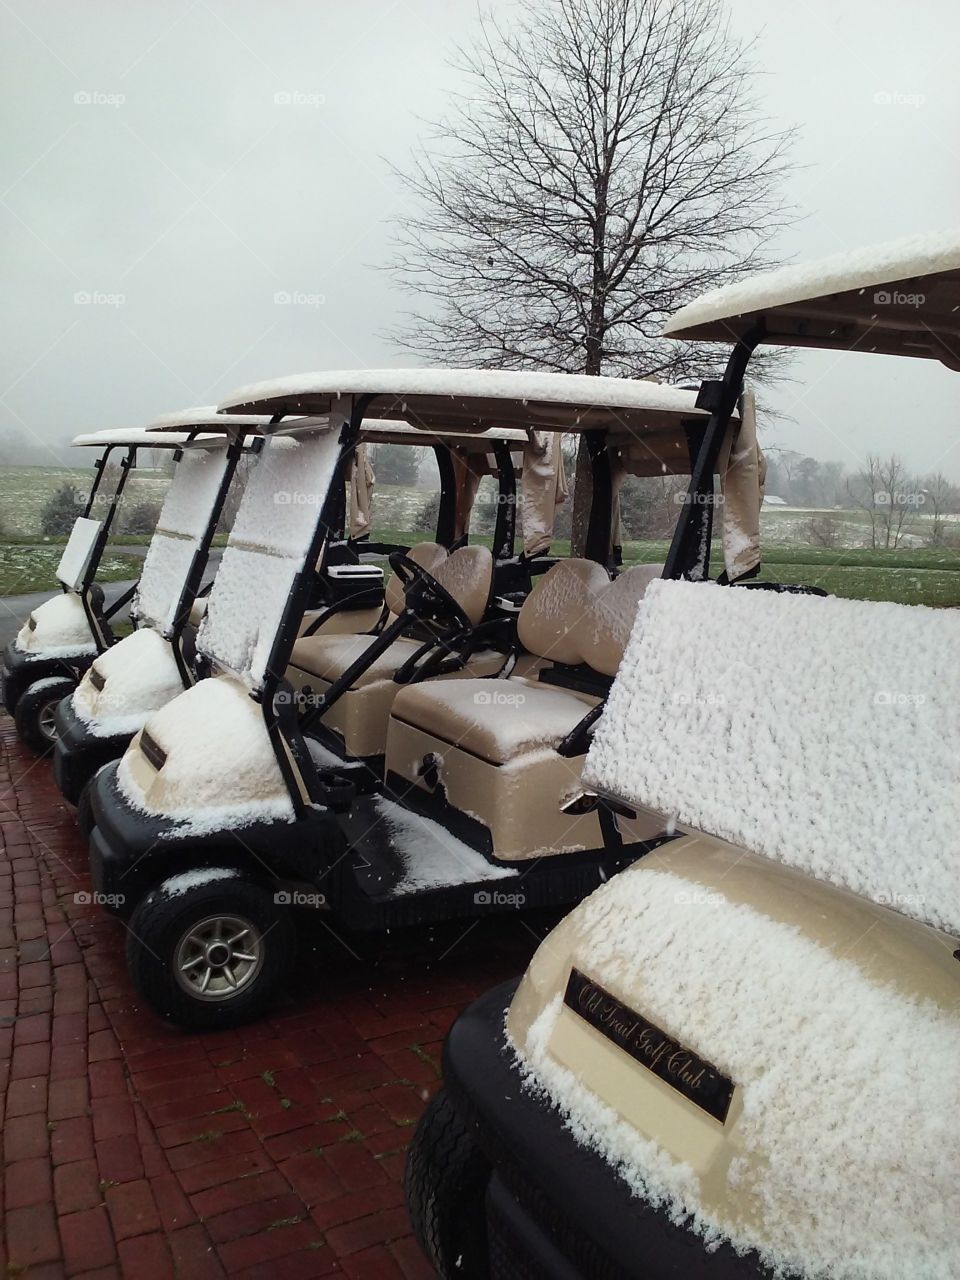 Snow dusted golf carts 